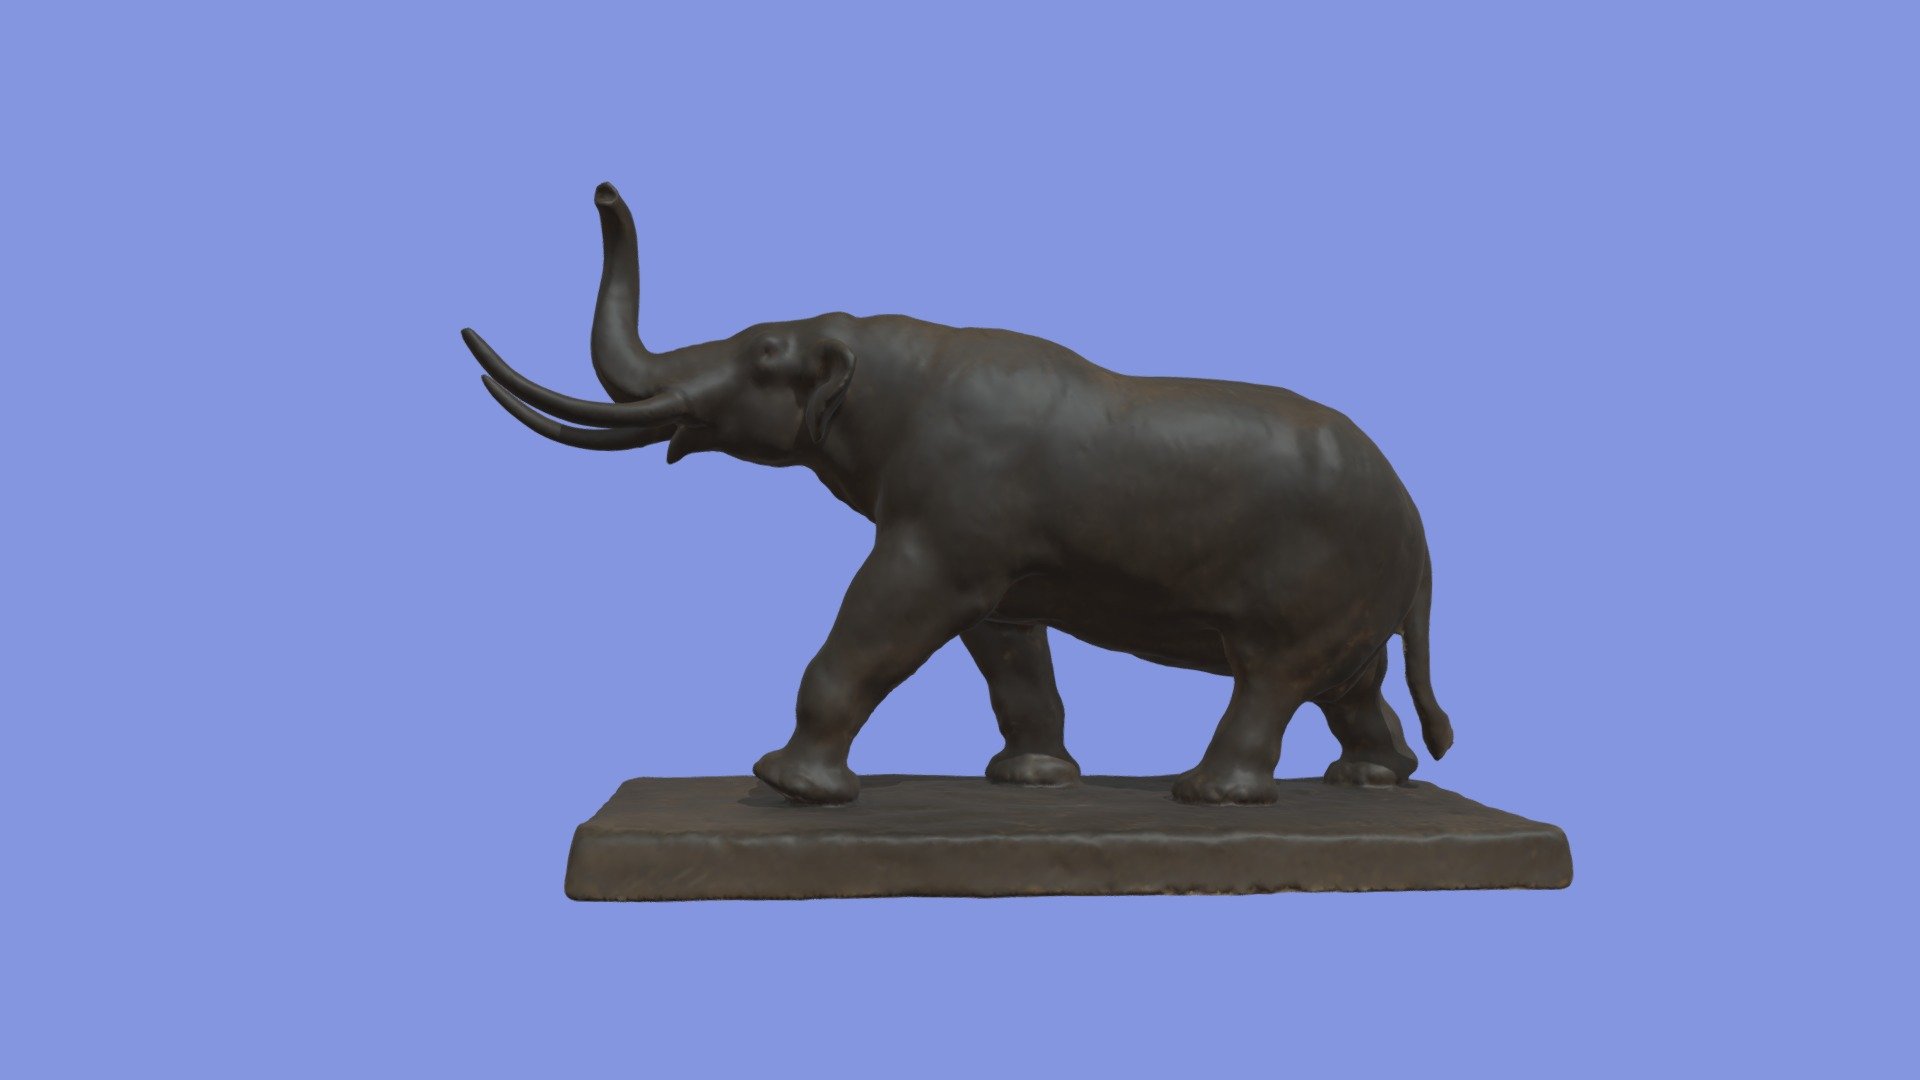 This mastodon sculpture sculpture was created by James L. Clark (1883-1969) in 1956. It was 3D scanned with a Go!Scan 50 on 27 May 2022 at the New York State Museum. Courtesy of the New York State Museum 3d model